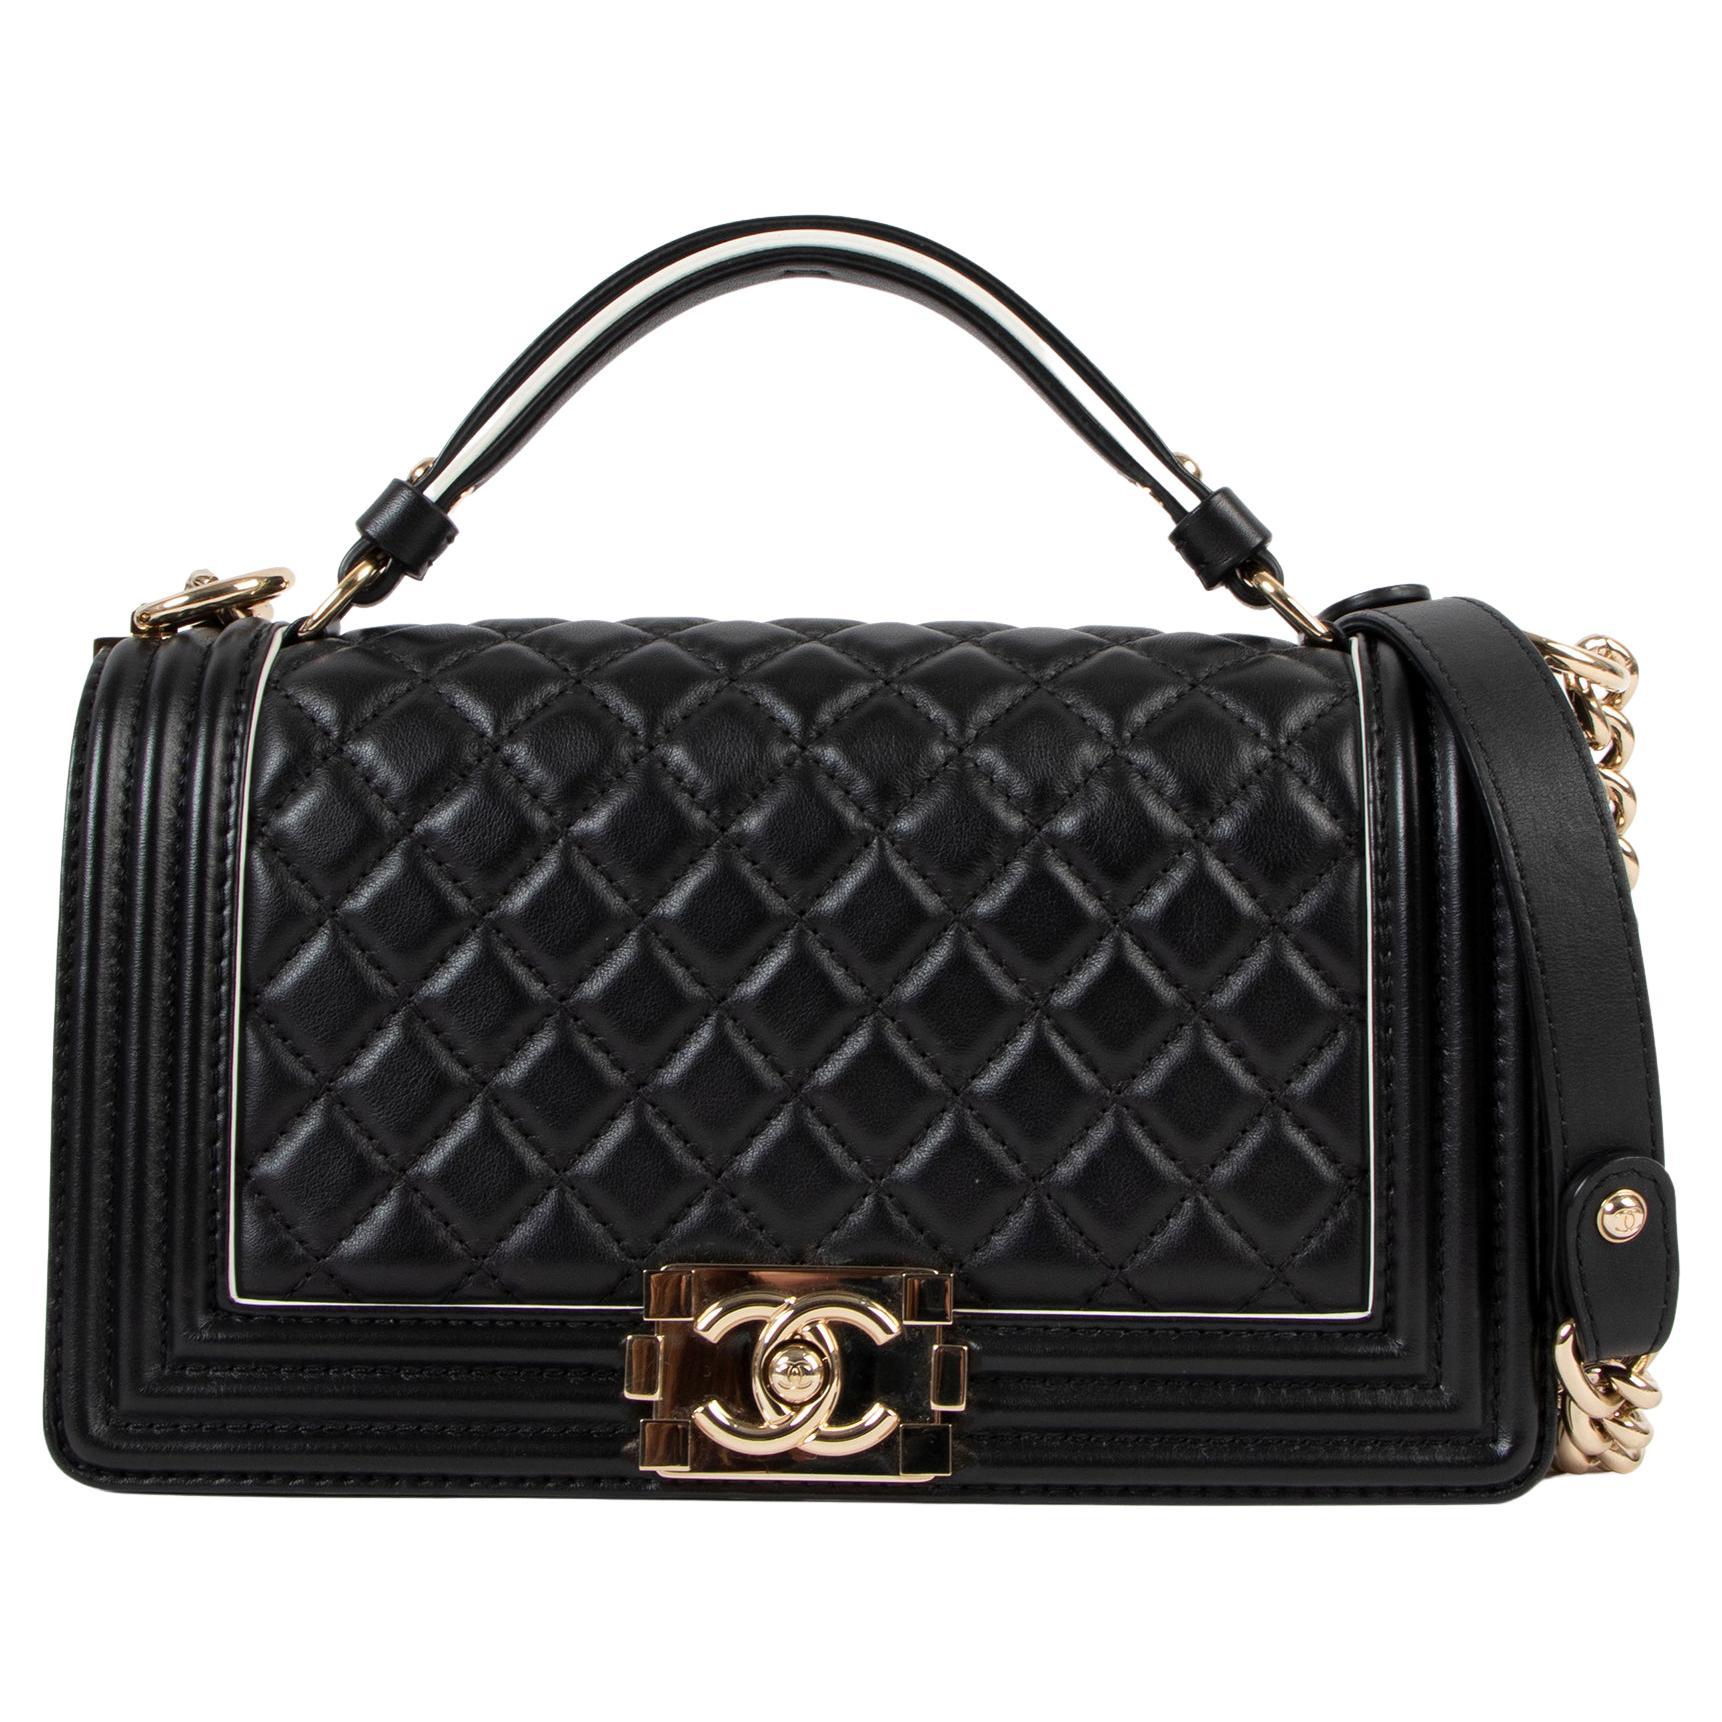 CHANEL Black Quilted Lambskin Leather Small Classic Top Handle